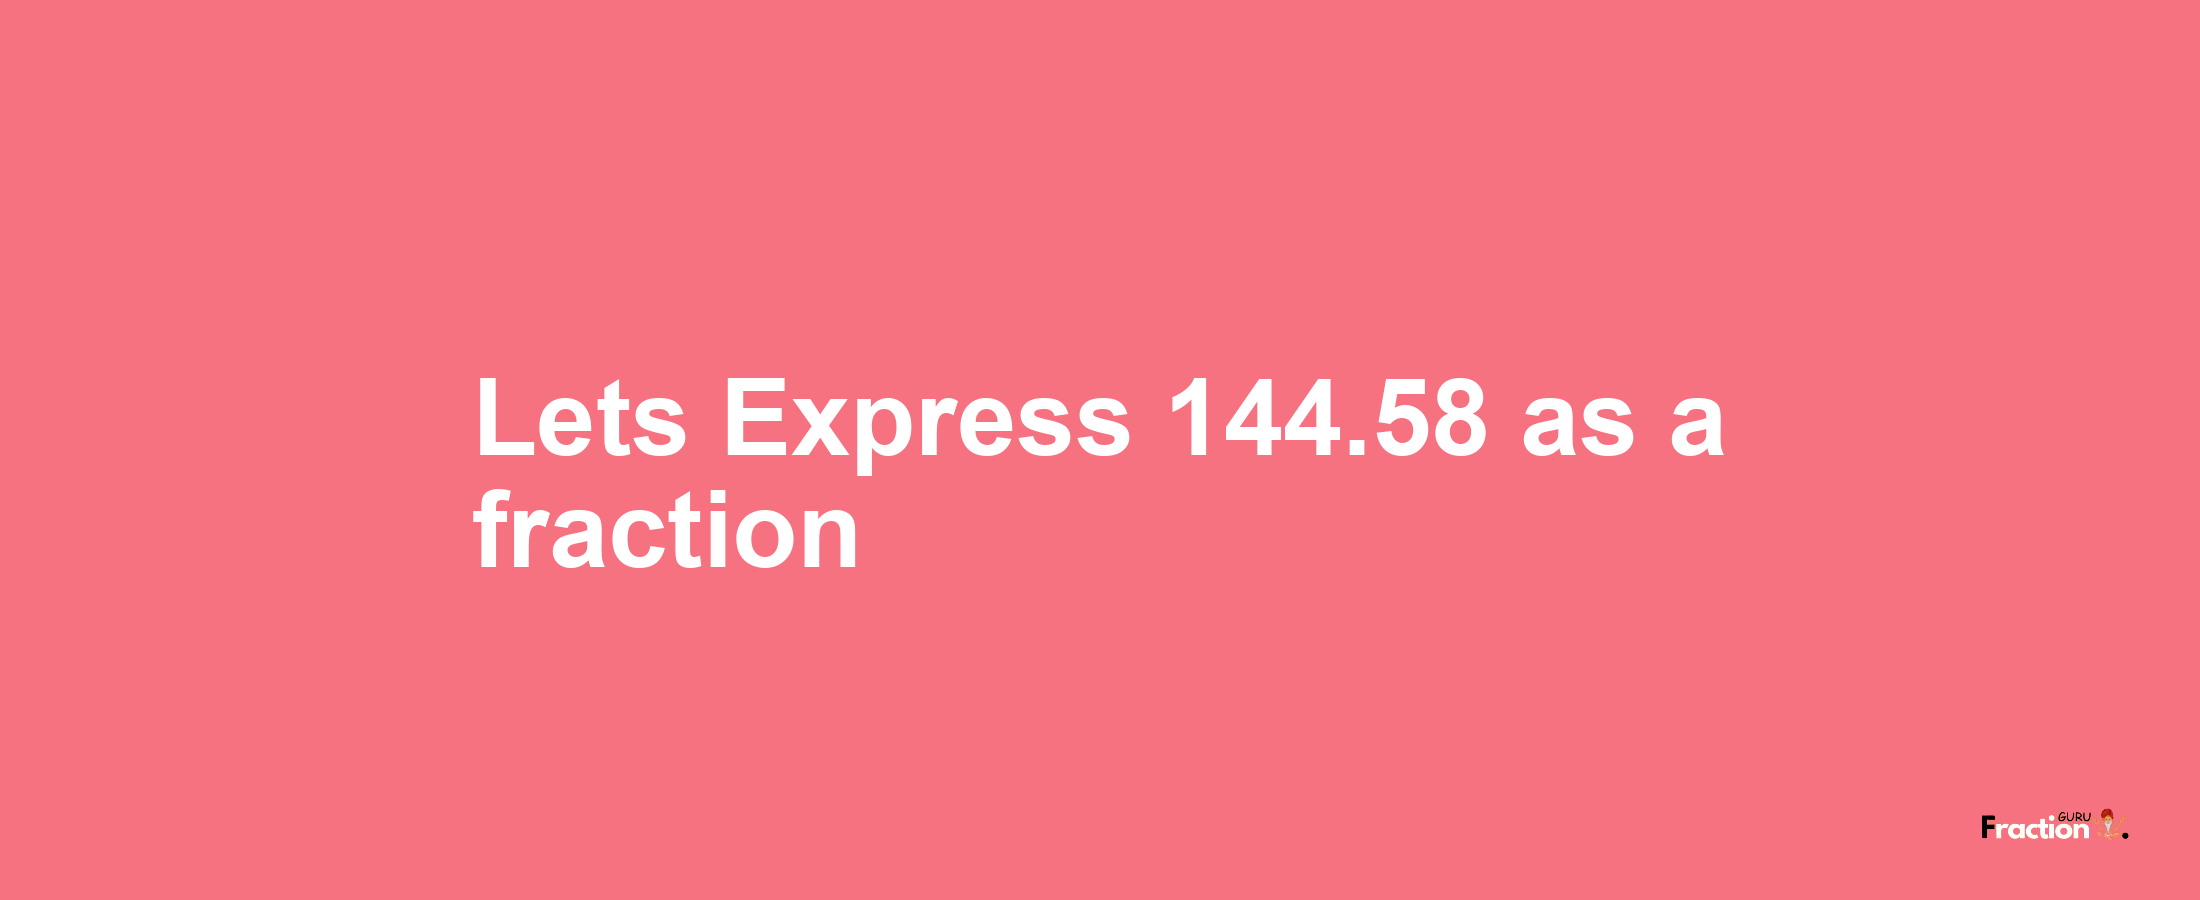 Lets Express 144.58 as afraction